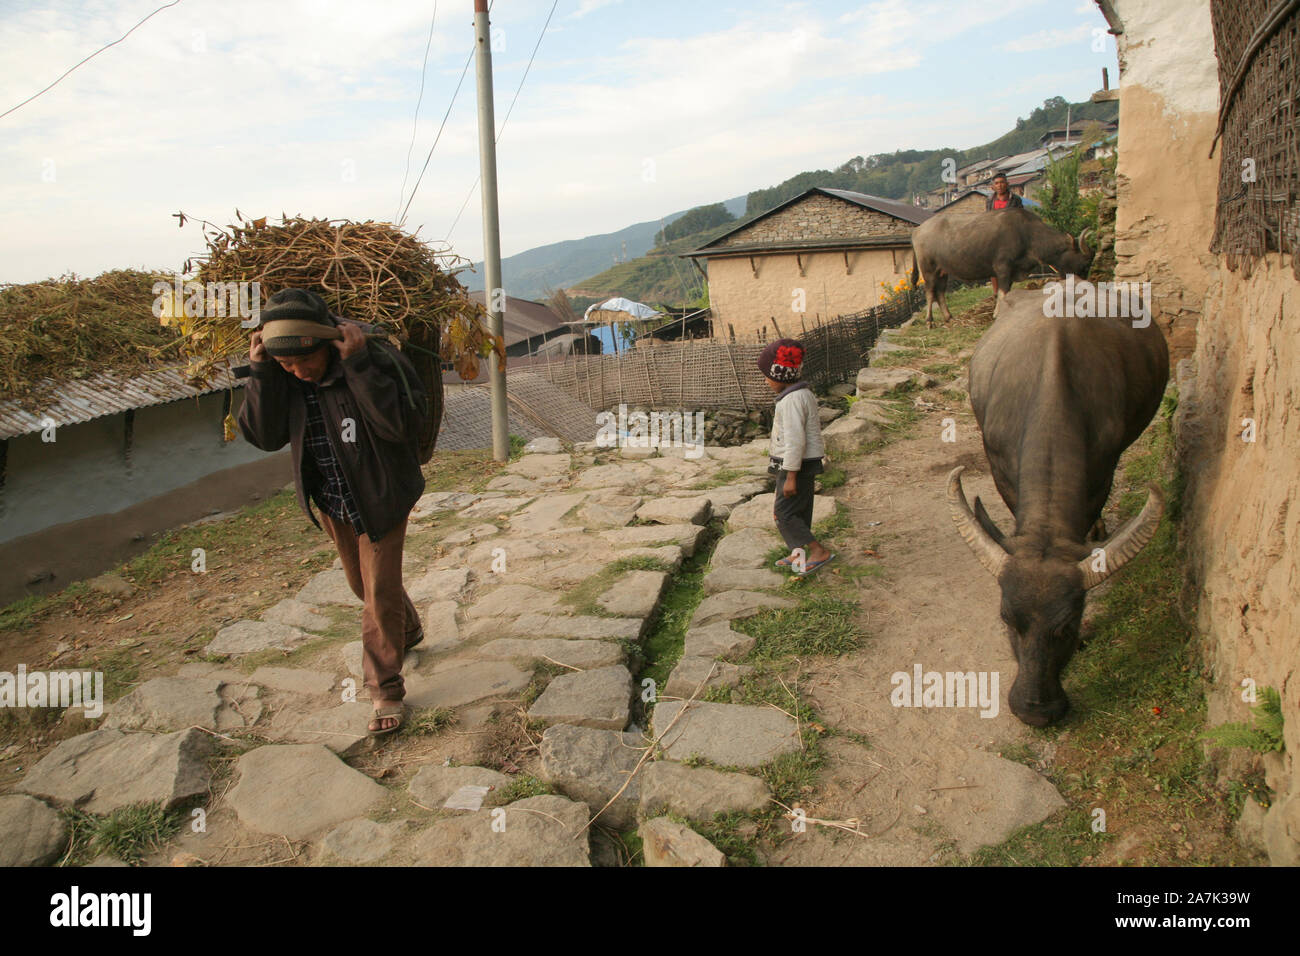 A villager carries a crop harvest on his back, Sikles, Nepal Stock Photo